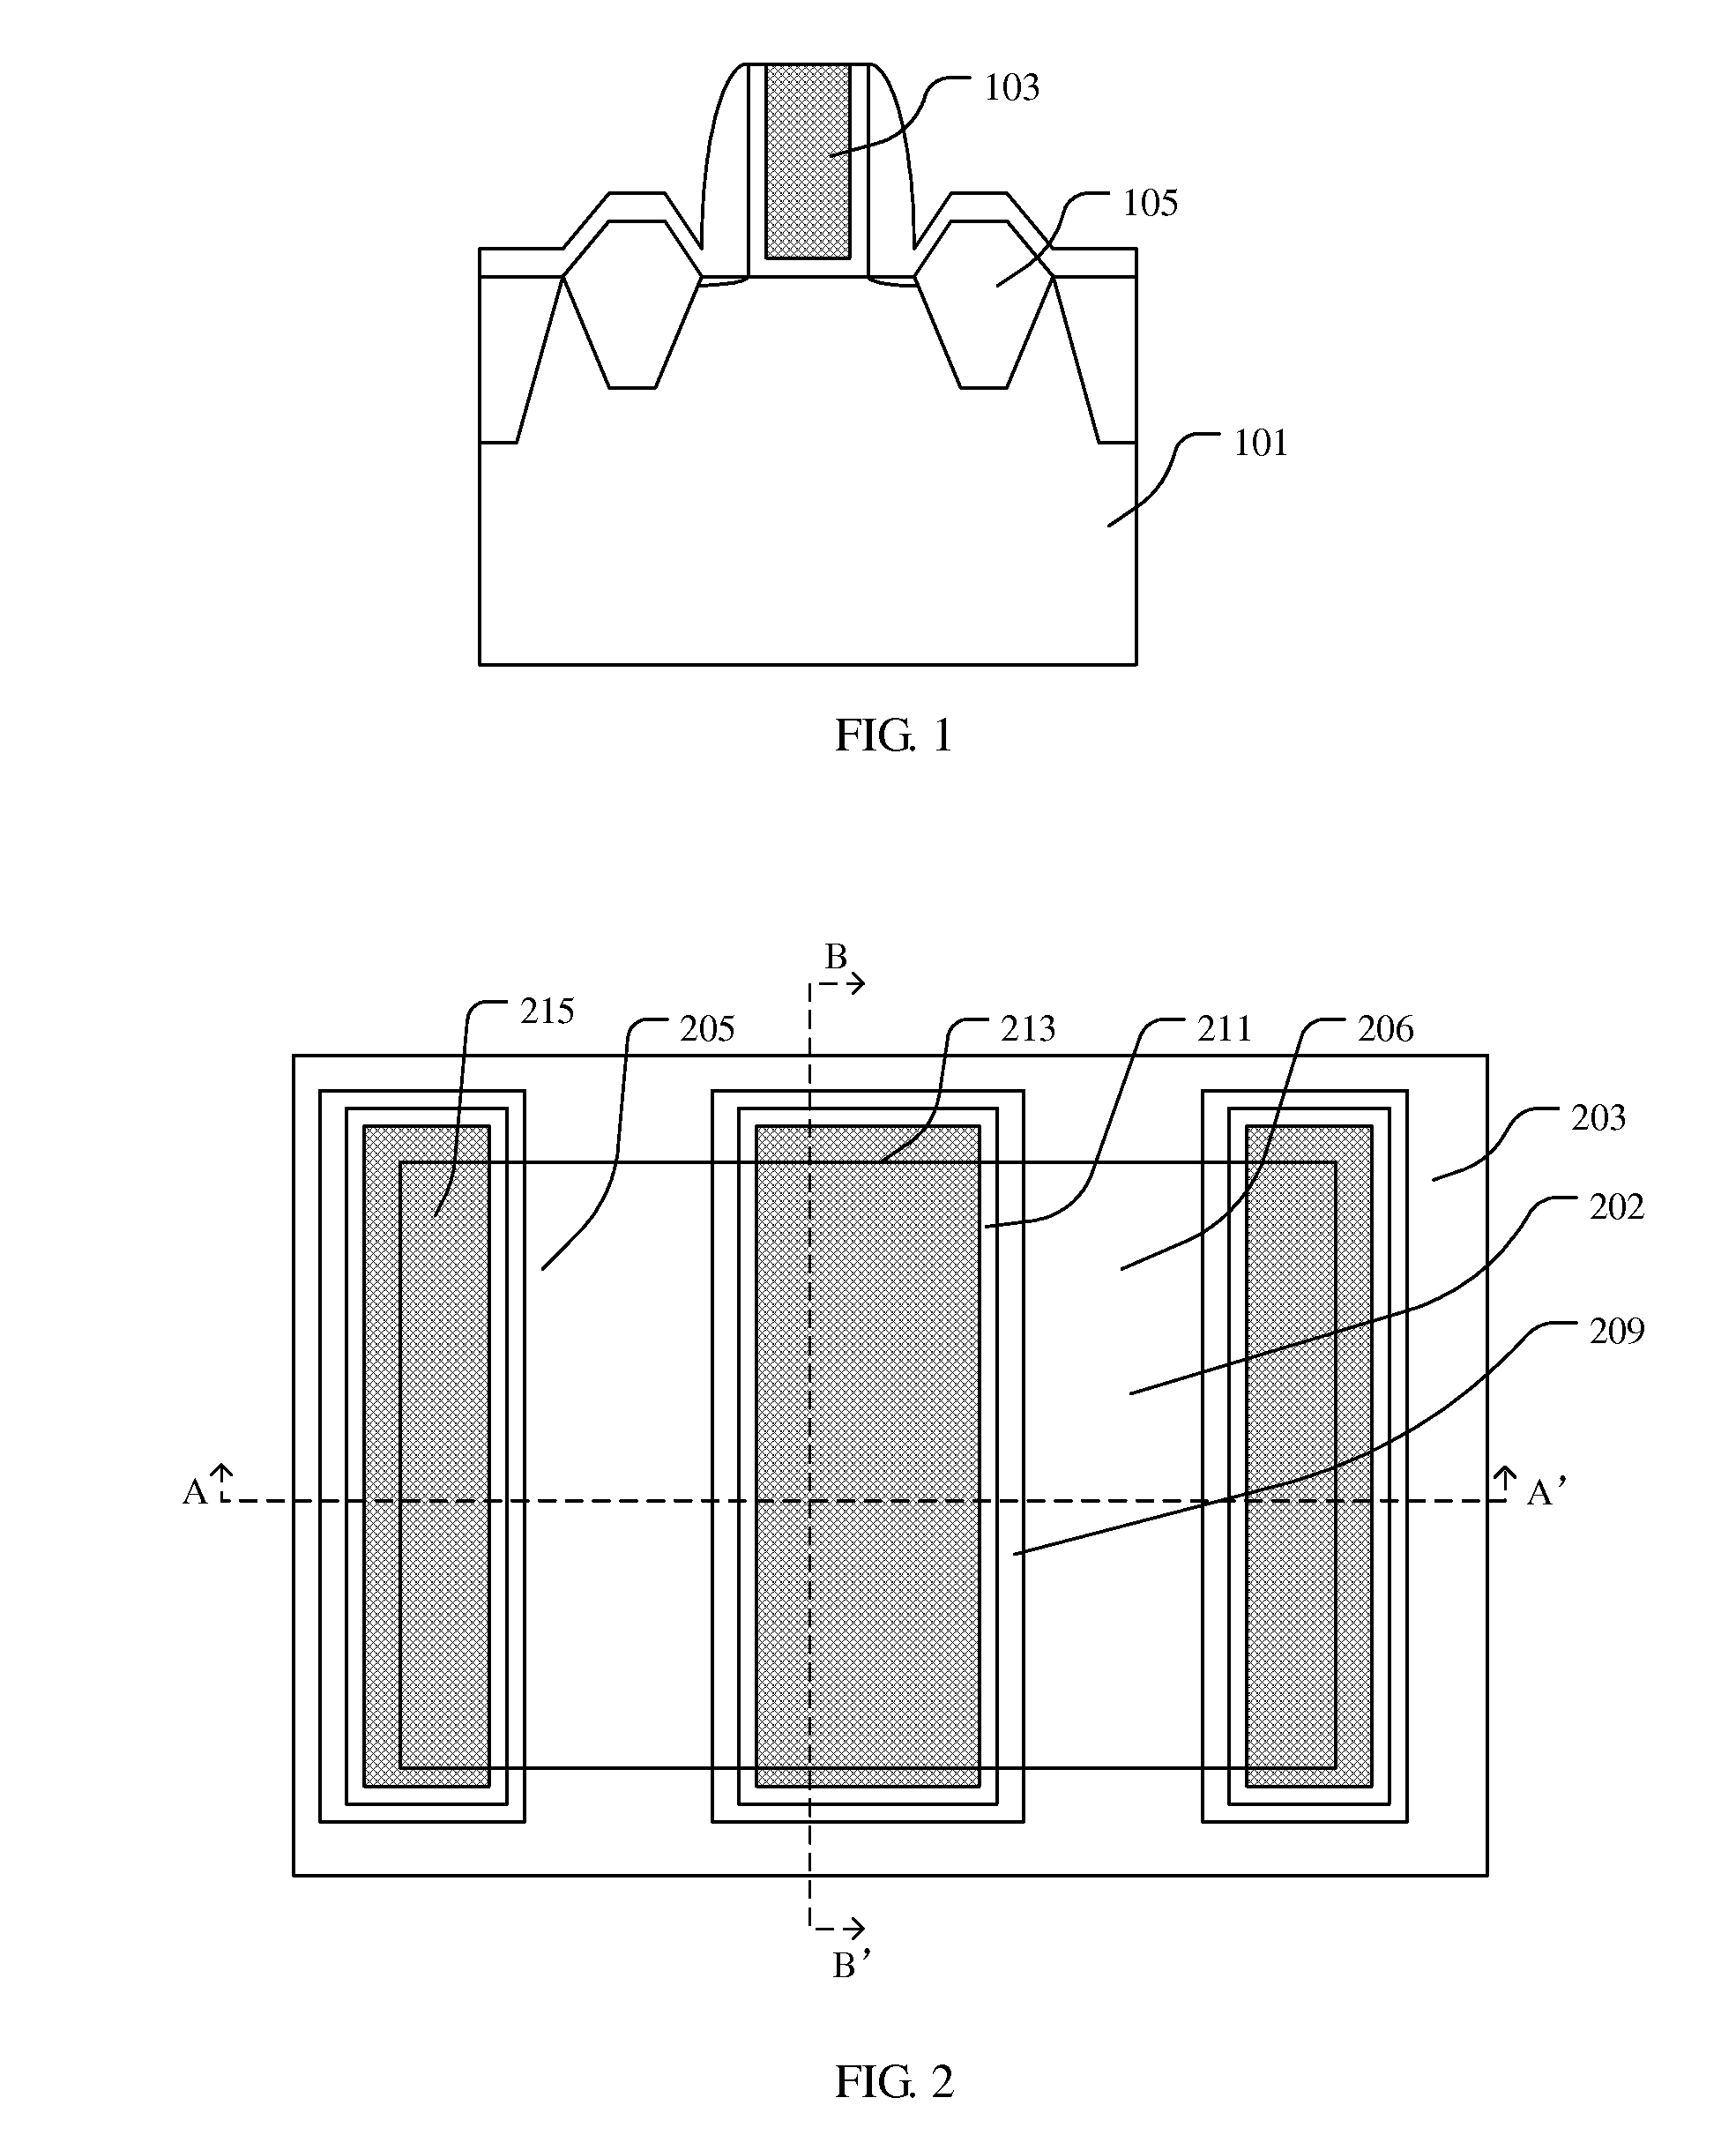 Ultra-thin body transistor and method for manufcturing the same